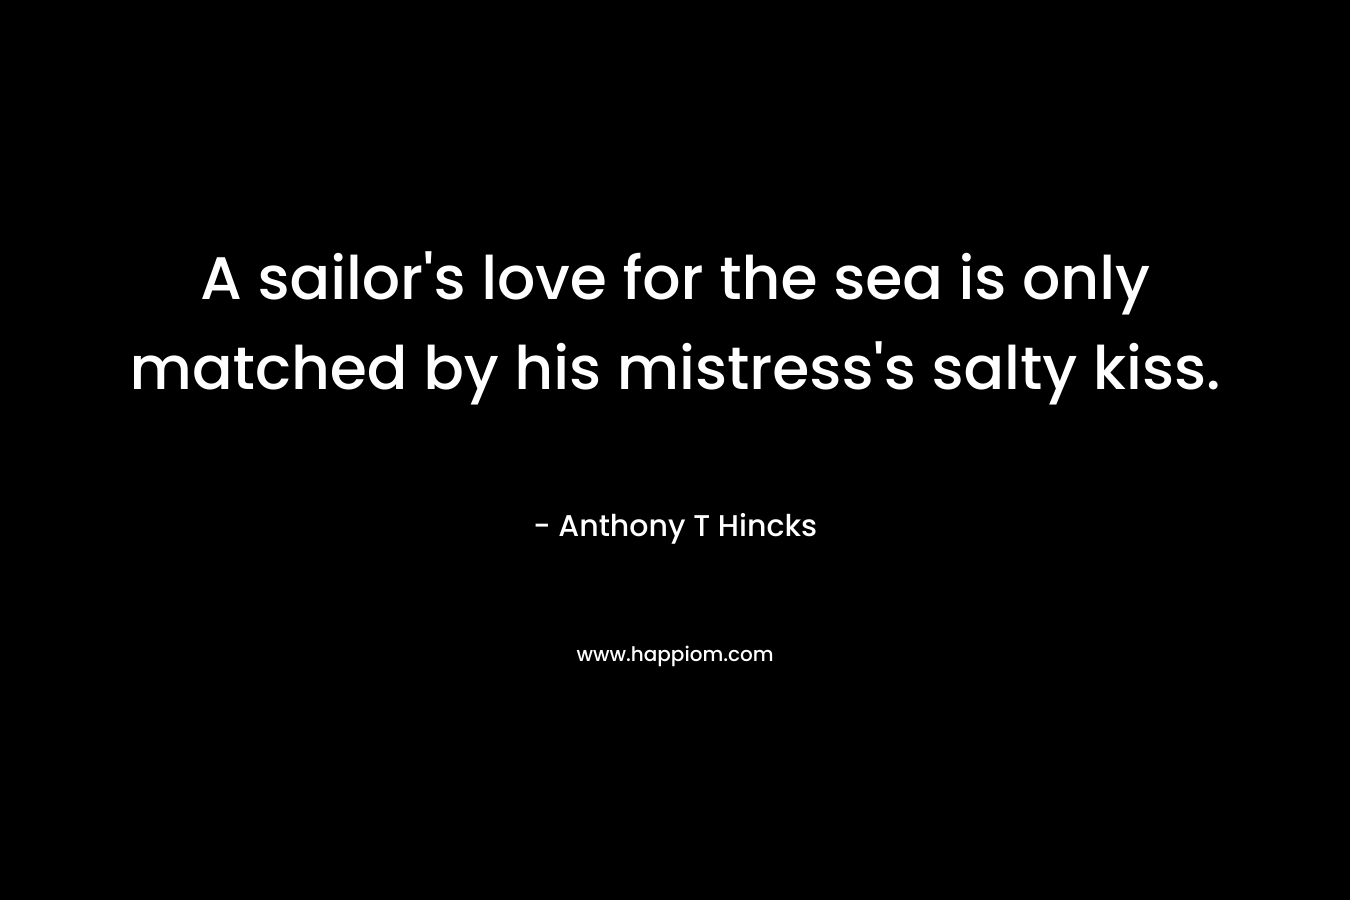 A sailor's love for the sea is only matched by his mistress's salty kiss.